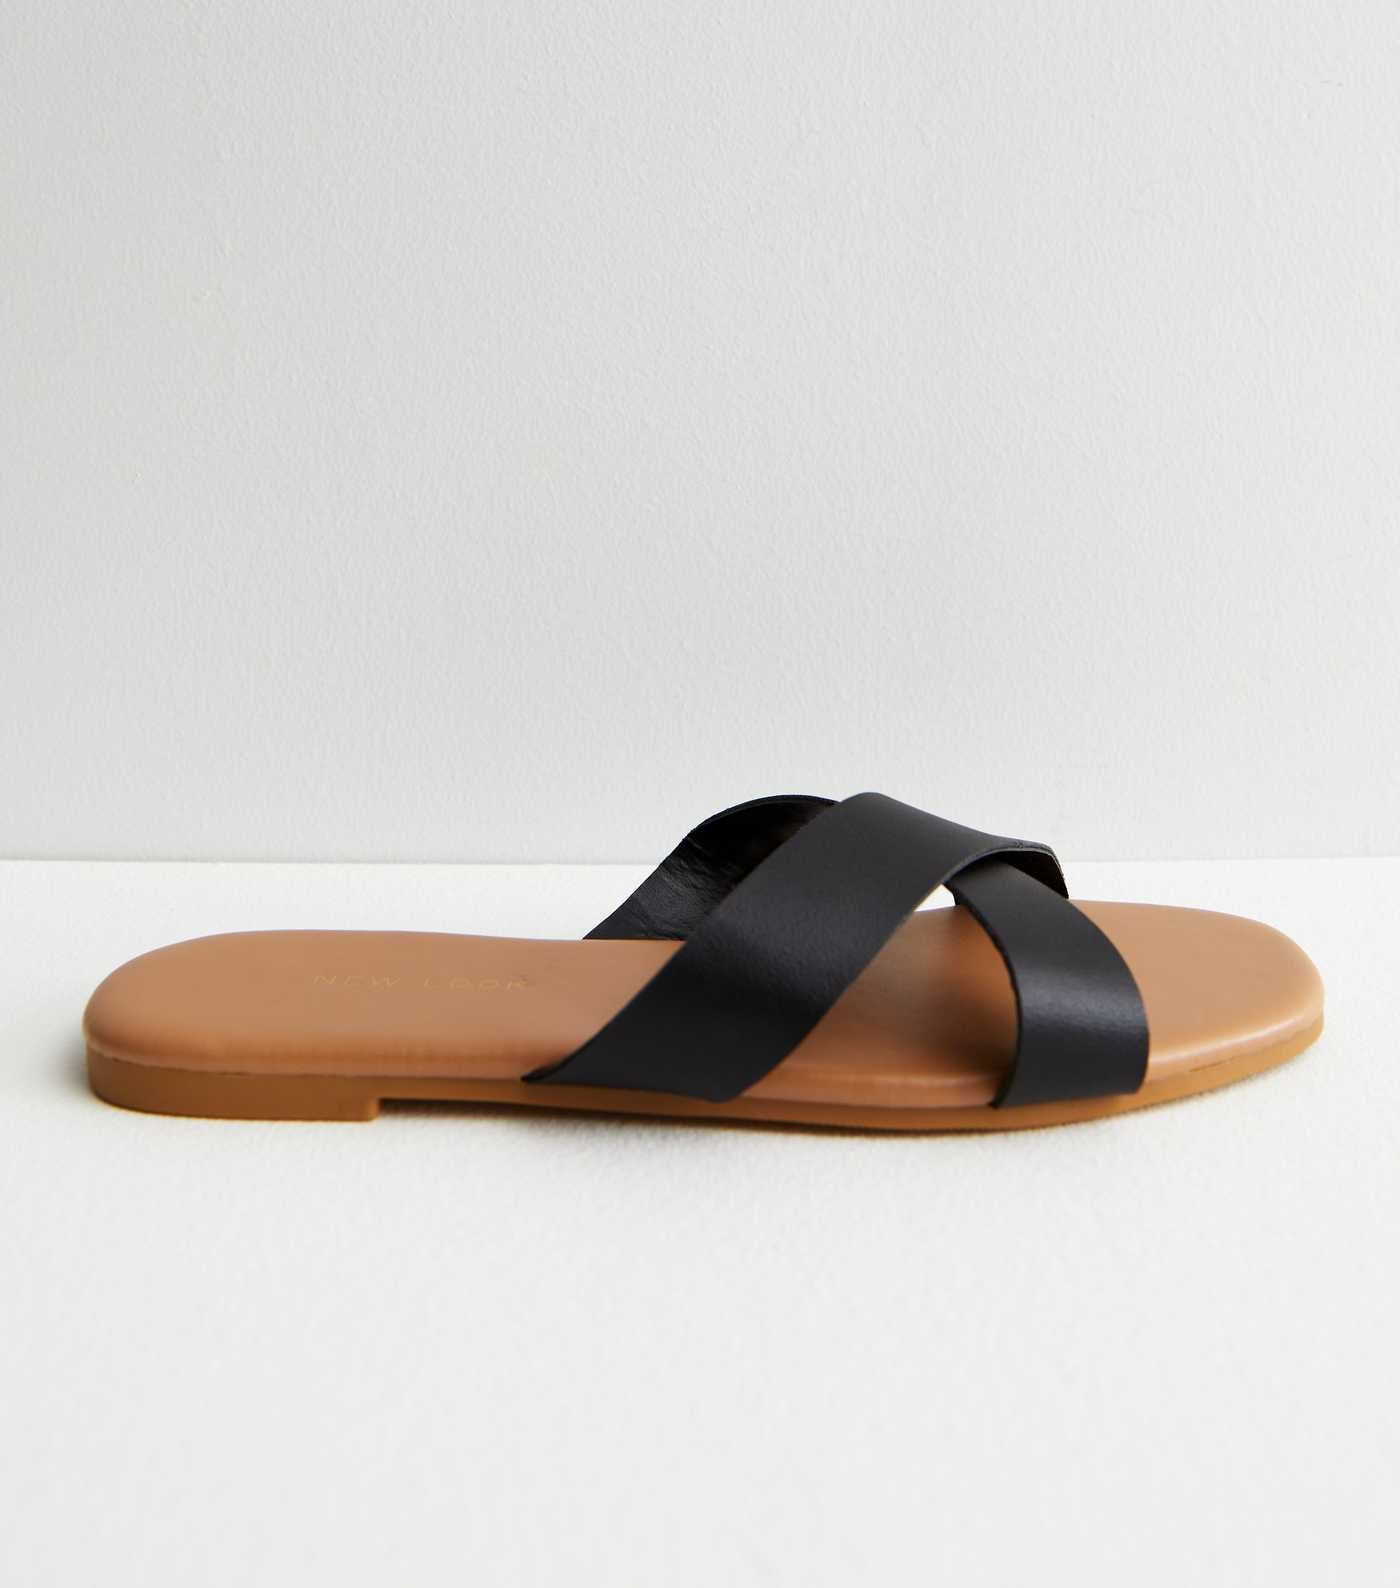 Black Leather-Look Cross Strap Sliders
						
						Add to Saved Items
						Remove from Saved It... | New Look (UK)